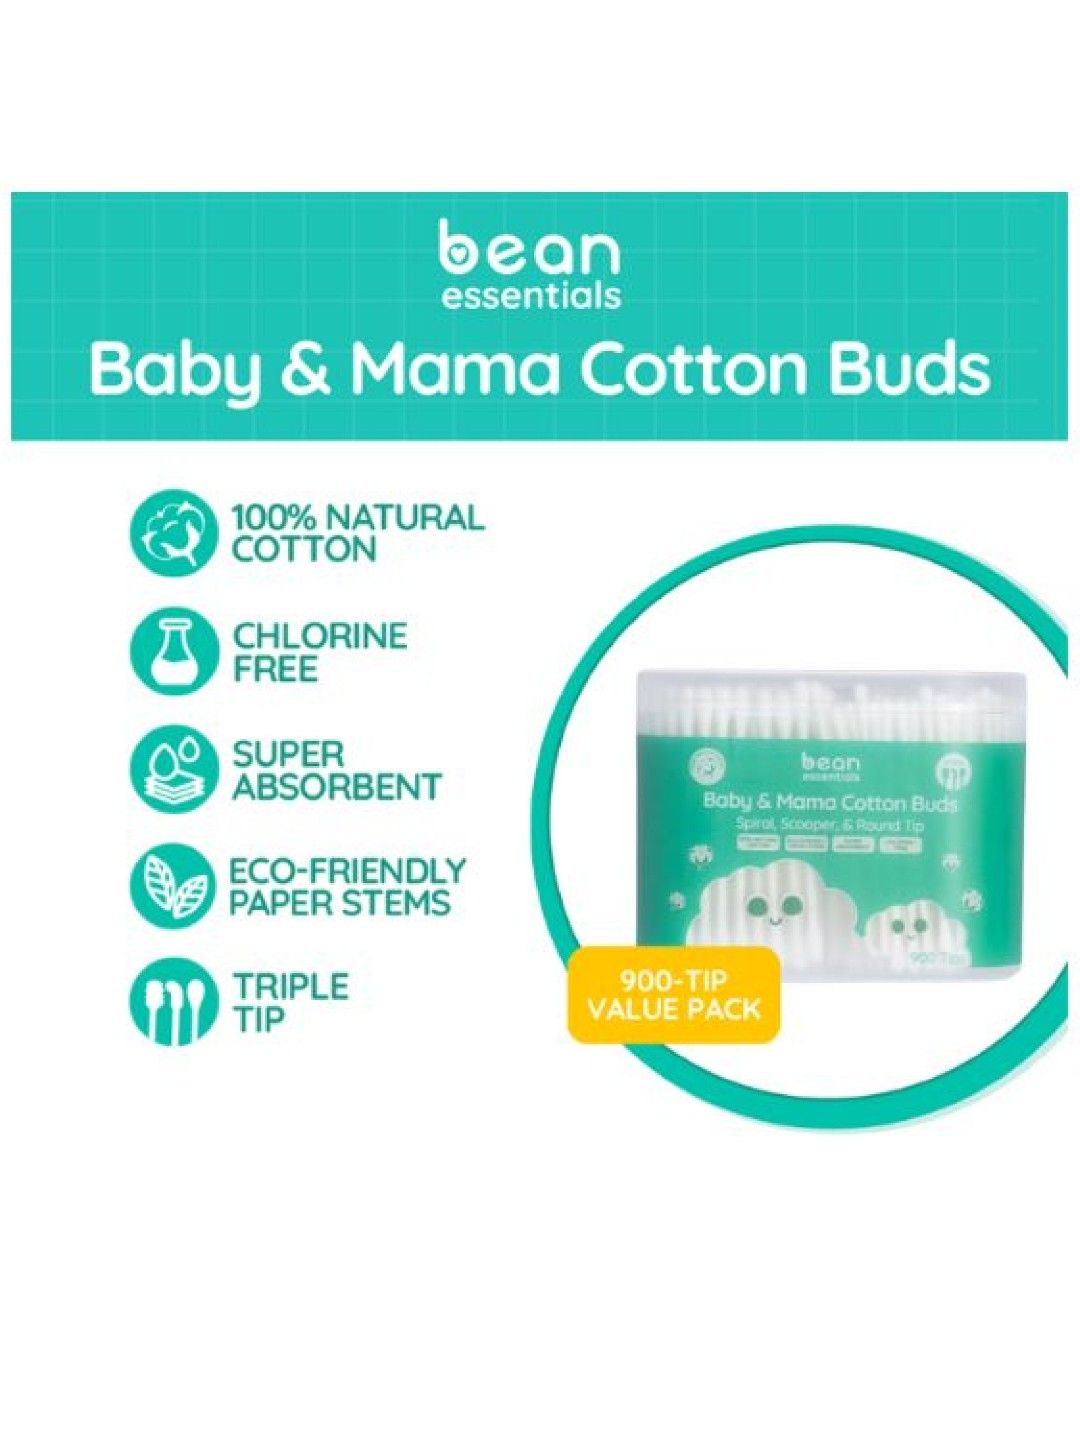 bean essentials Family Value Pack (Scooper + Spiral + Round) Cotton buds (900 tips) (No Color- Image 2)